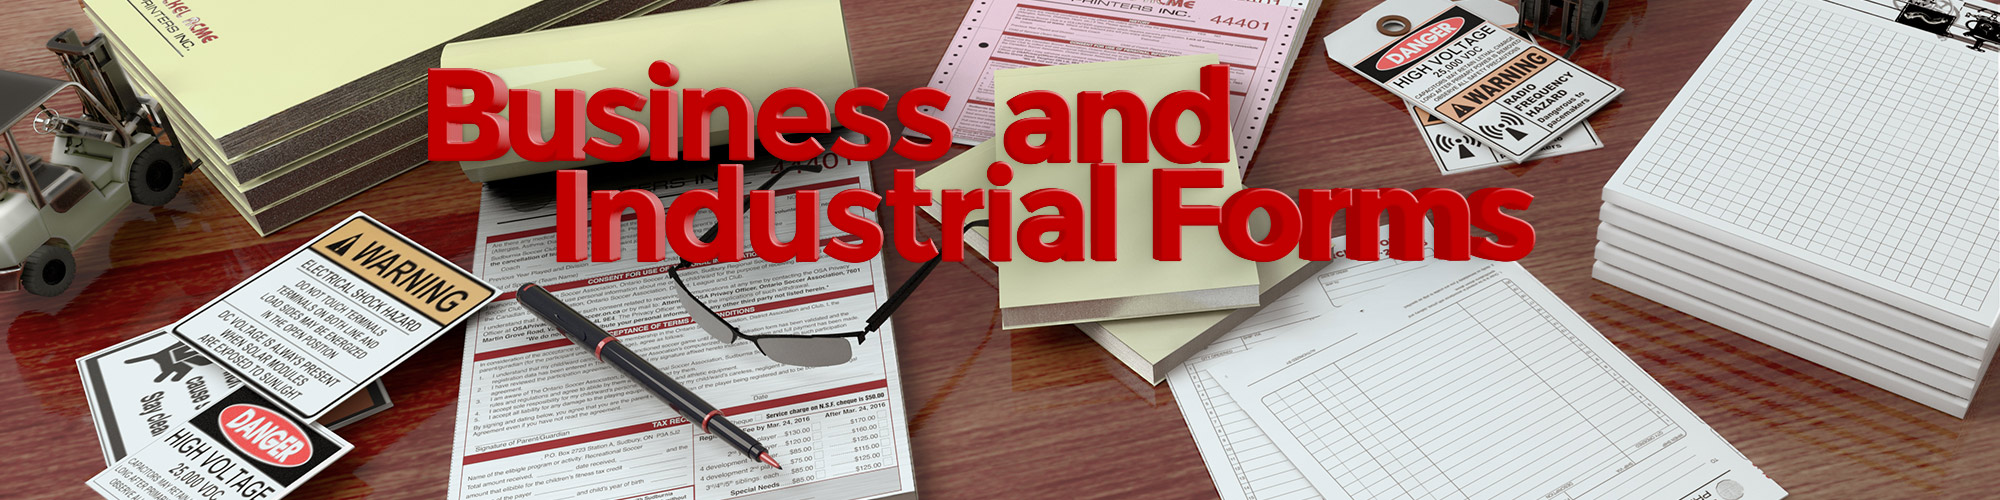 Business and Industrial Forms